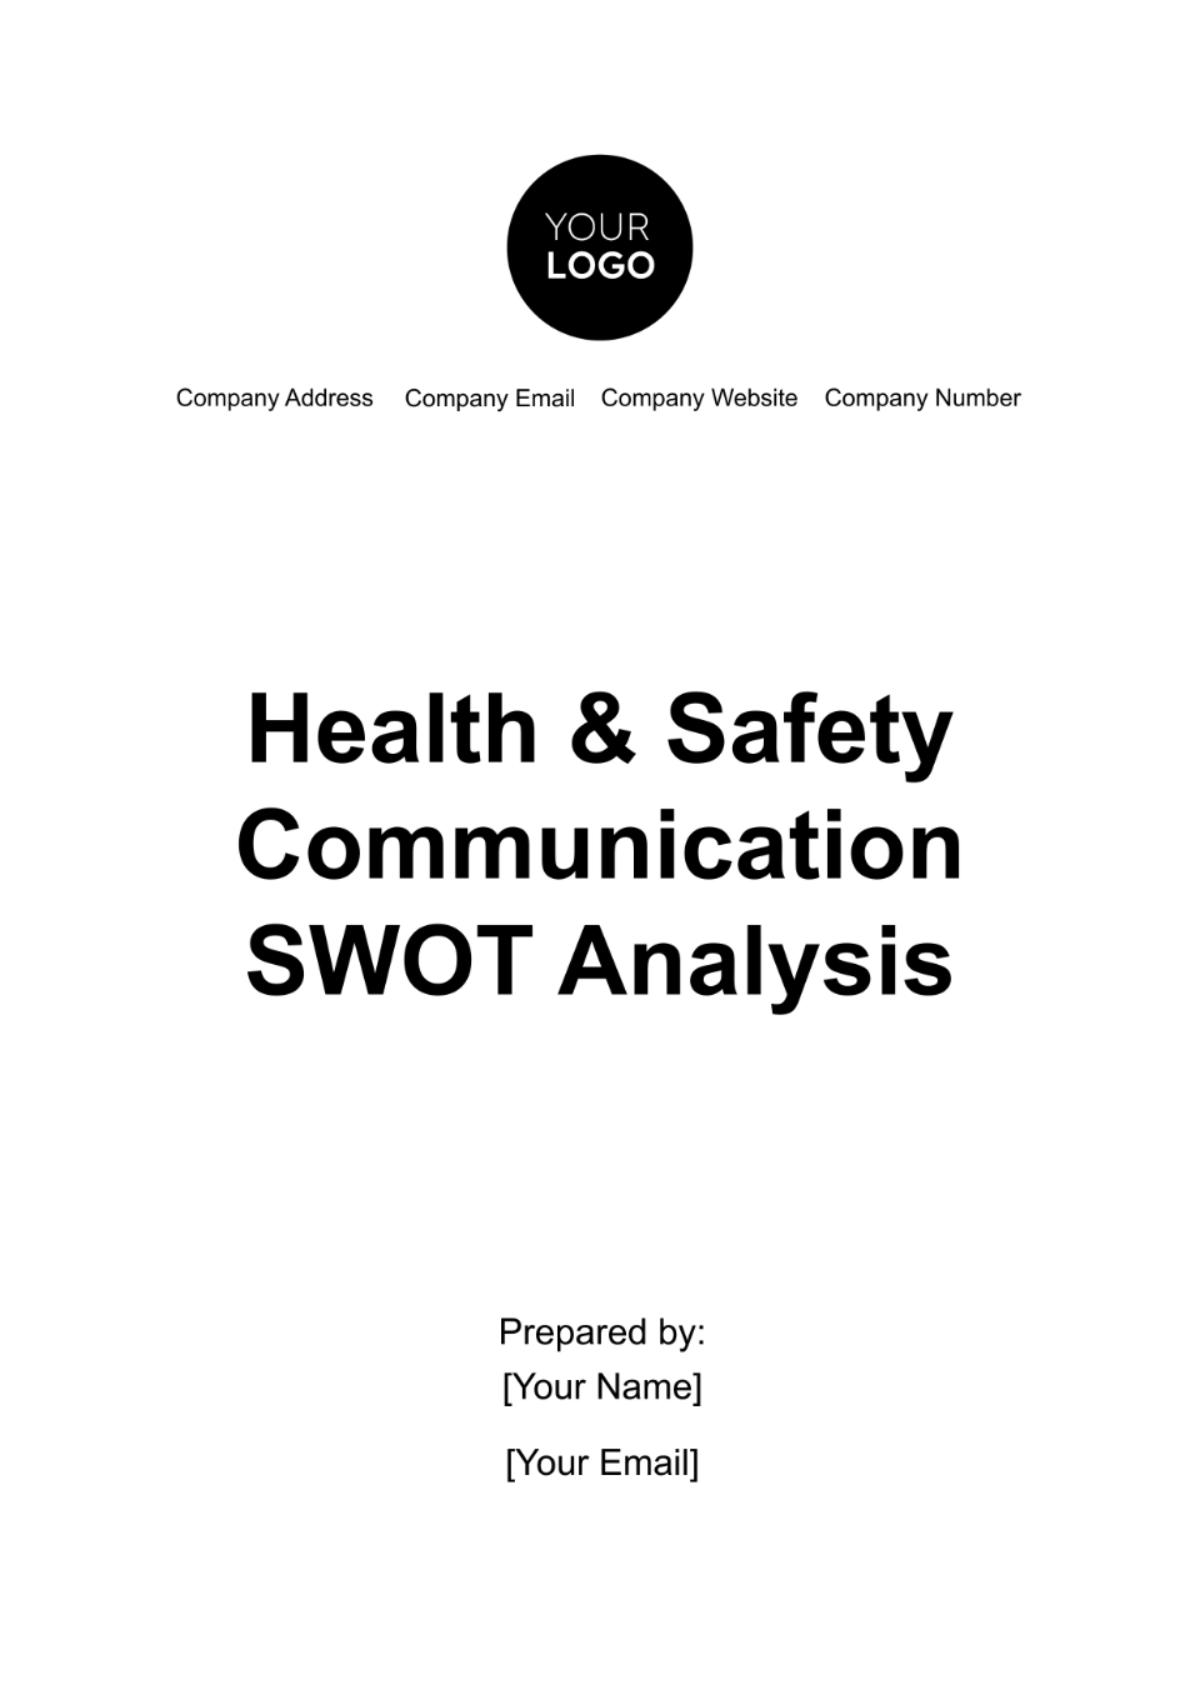 Health & Safety Communication SWOT Analysis Template